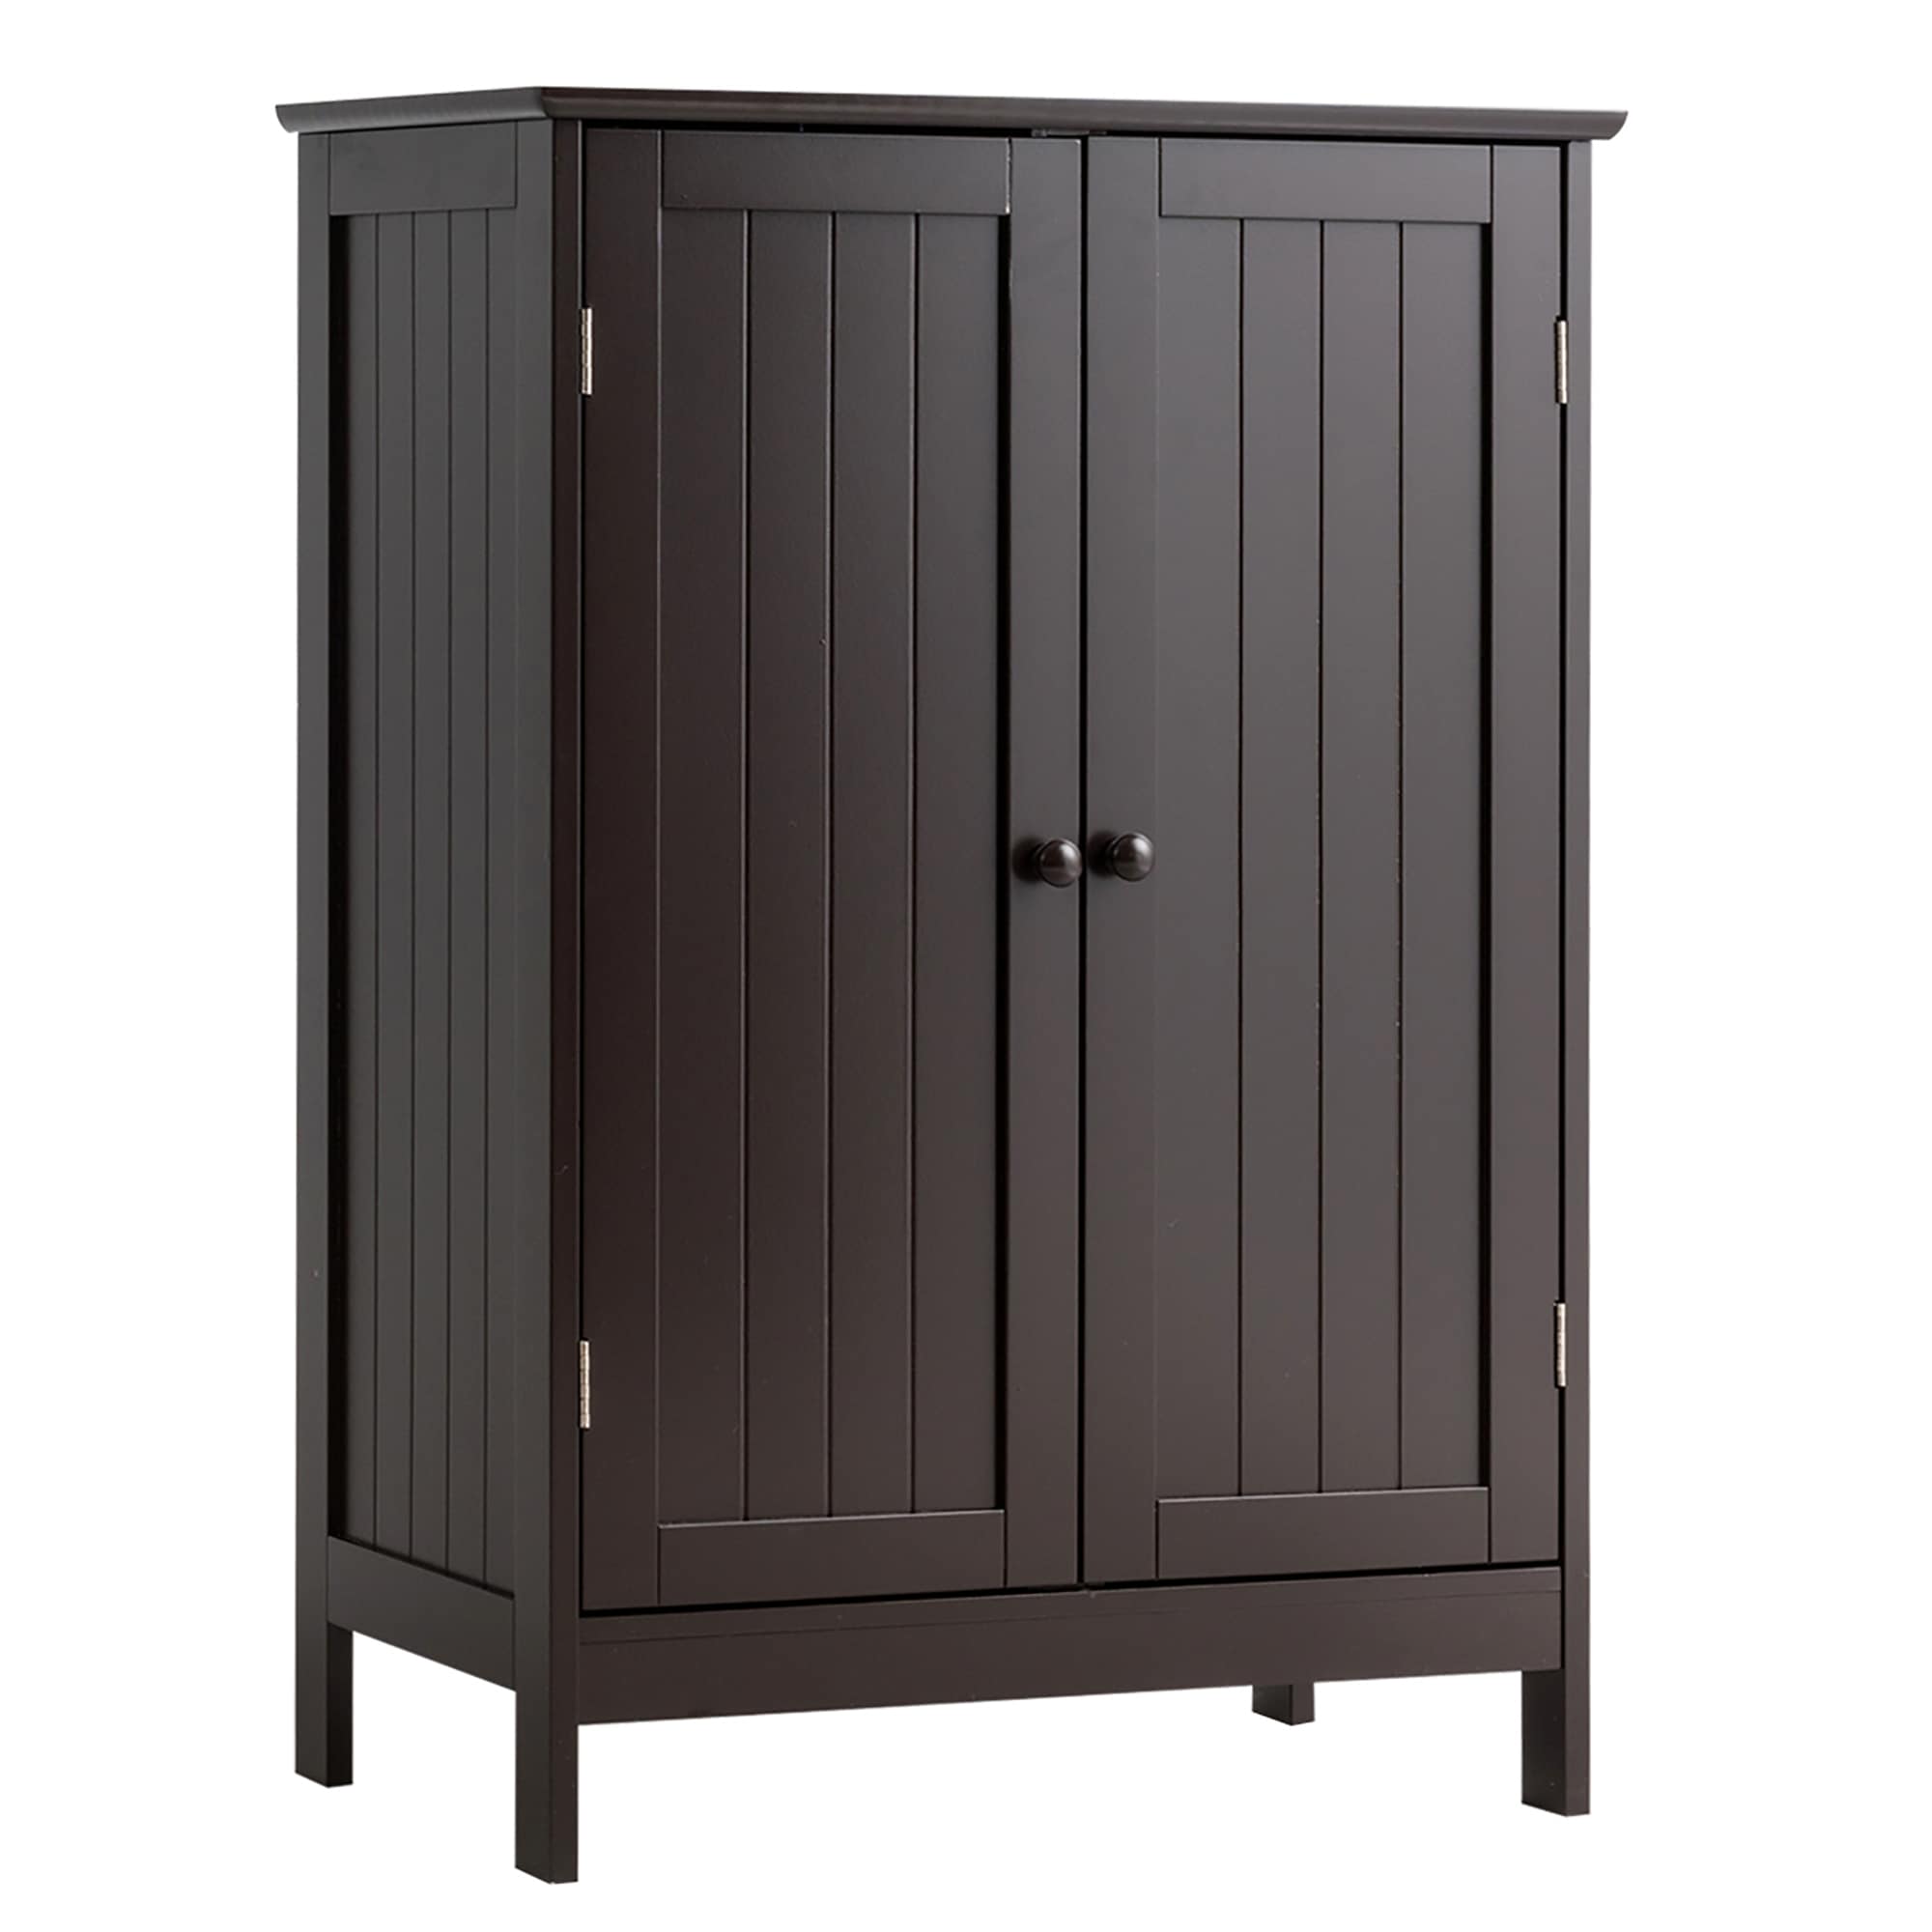 https://ak1.ostkcdn.com/images/products/is/images/direct/30352493c24ae0ca761ac3201c4ffea9672ca173/Bathroom-Storage-Cabinet-with-Double-Doors-Wooden-Floor-Shoe-Cabinet.jpg